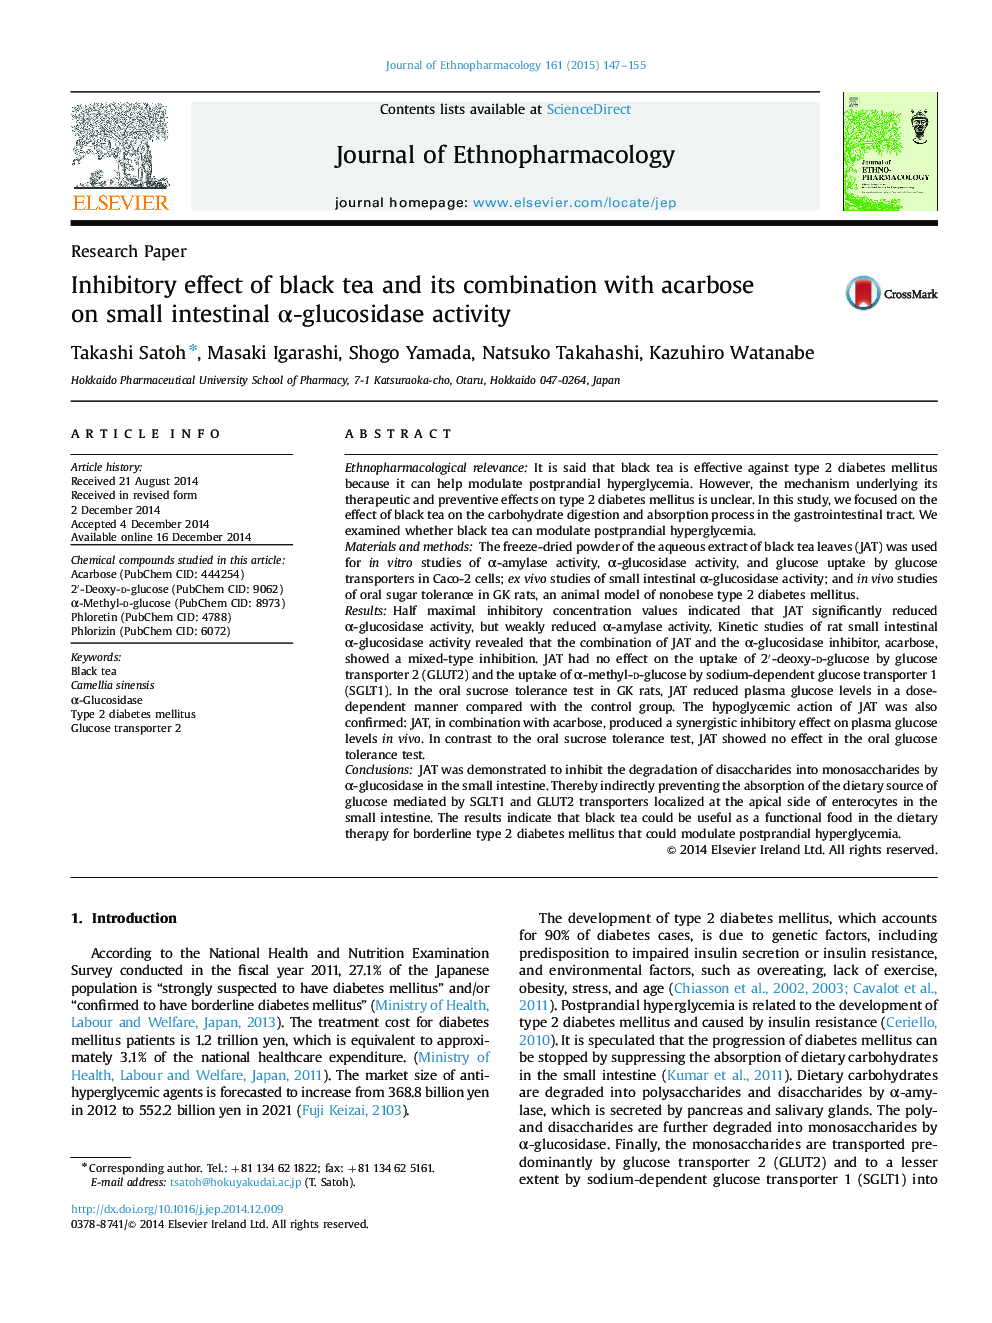 Inhibitory effect of black tea and its combination with acarbose on small intestinal Î±-glucosidase activity